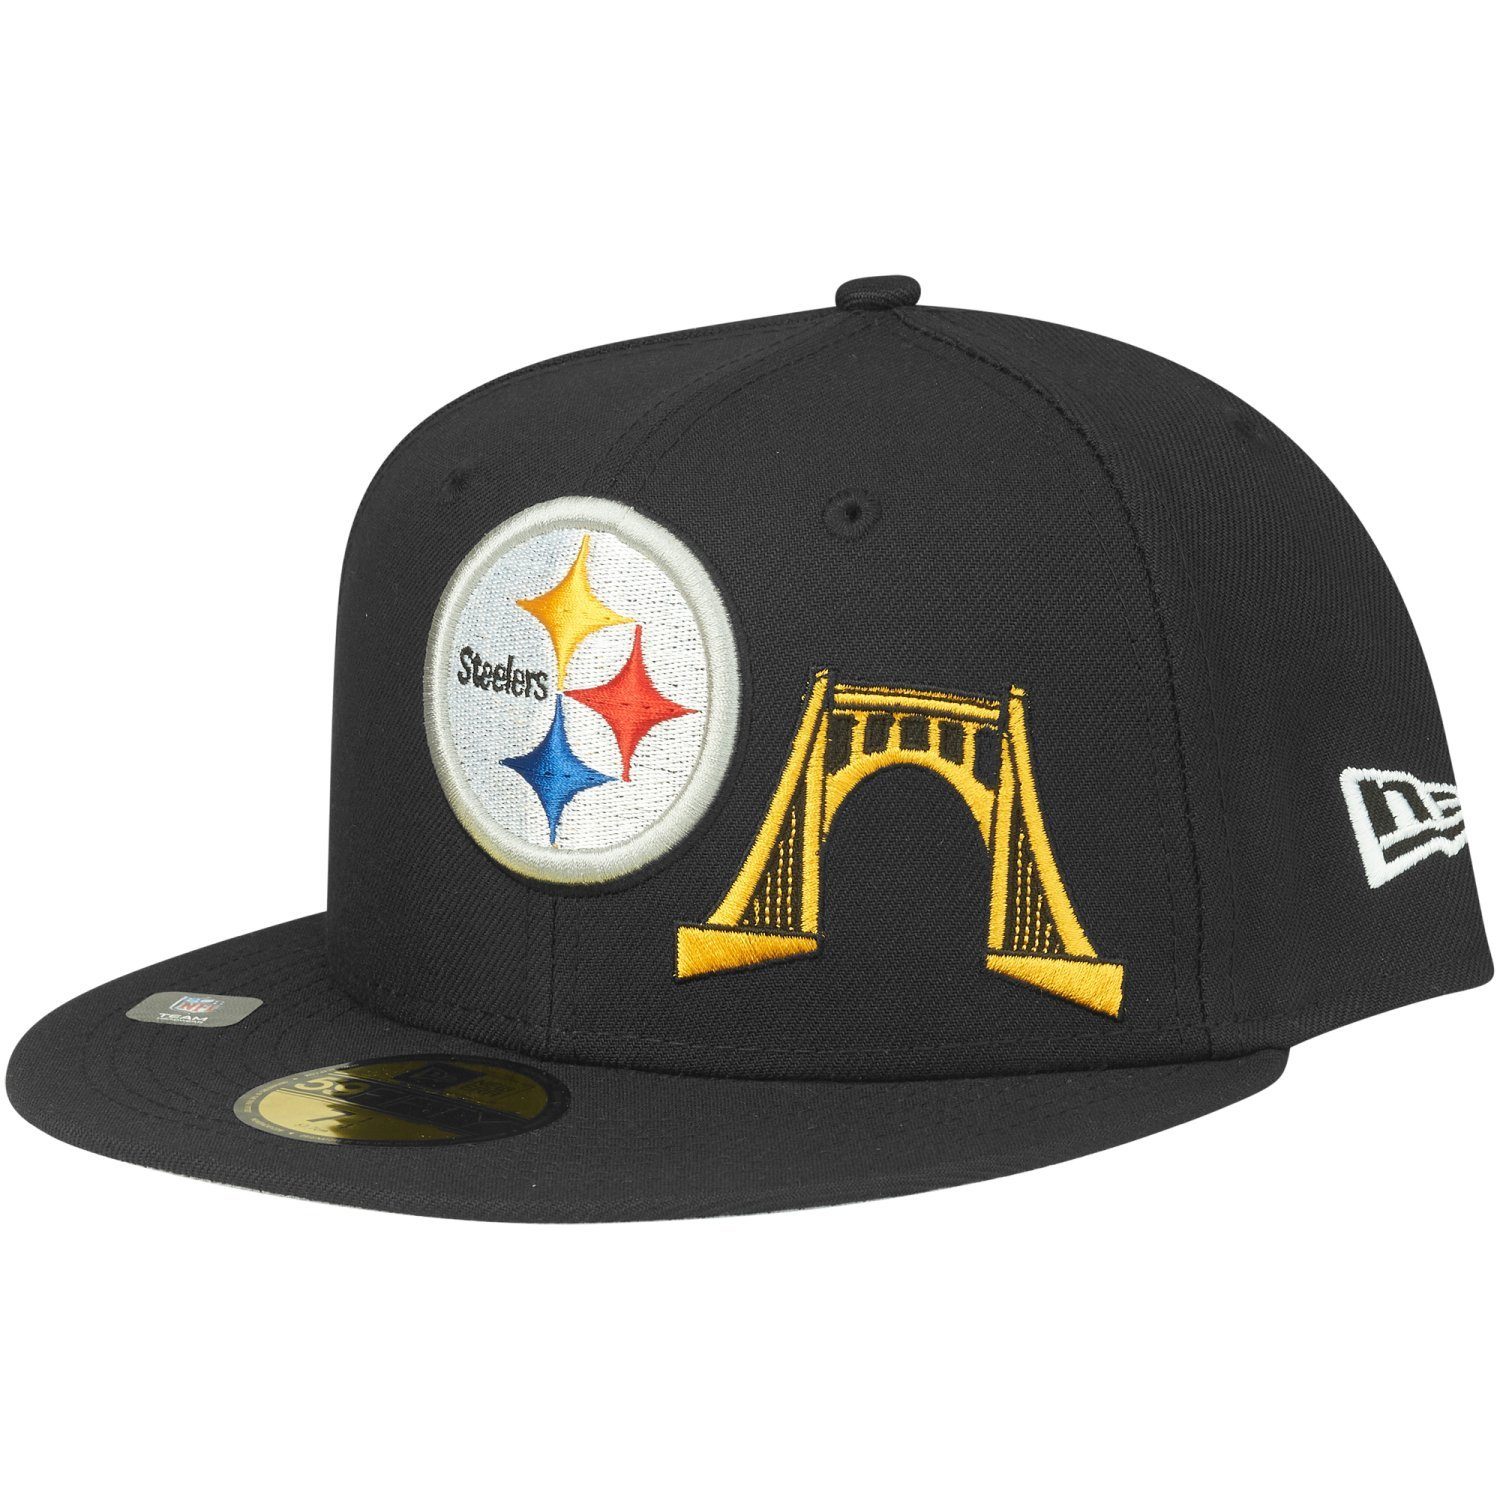 New Era Fitted Cap 59Fifty NFL CITY Pittsburgh Steelers